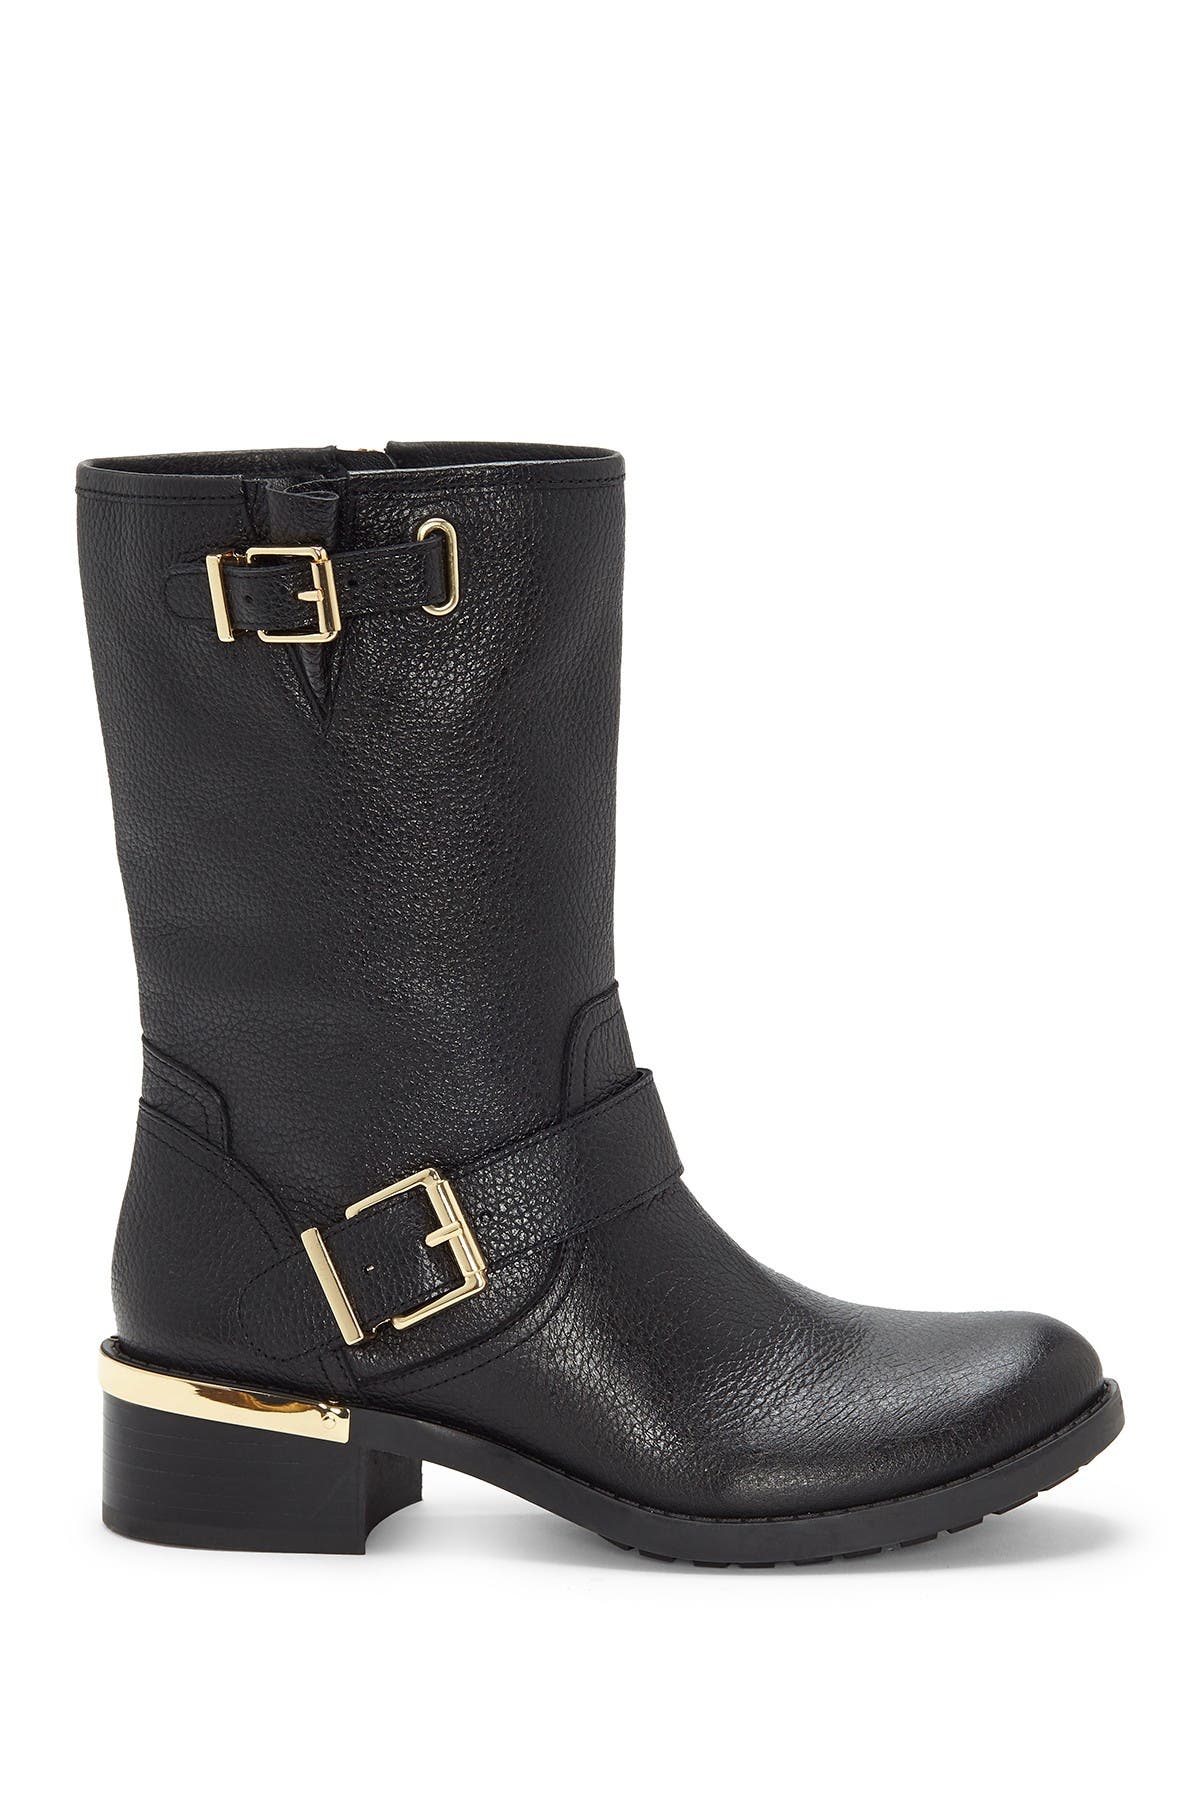 Vince Camuto | Whyla Mid Boot 